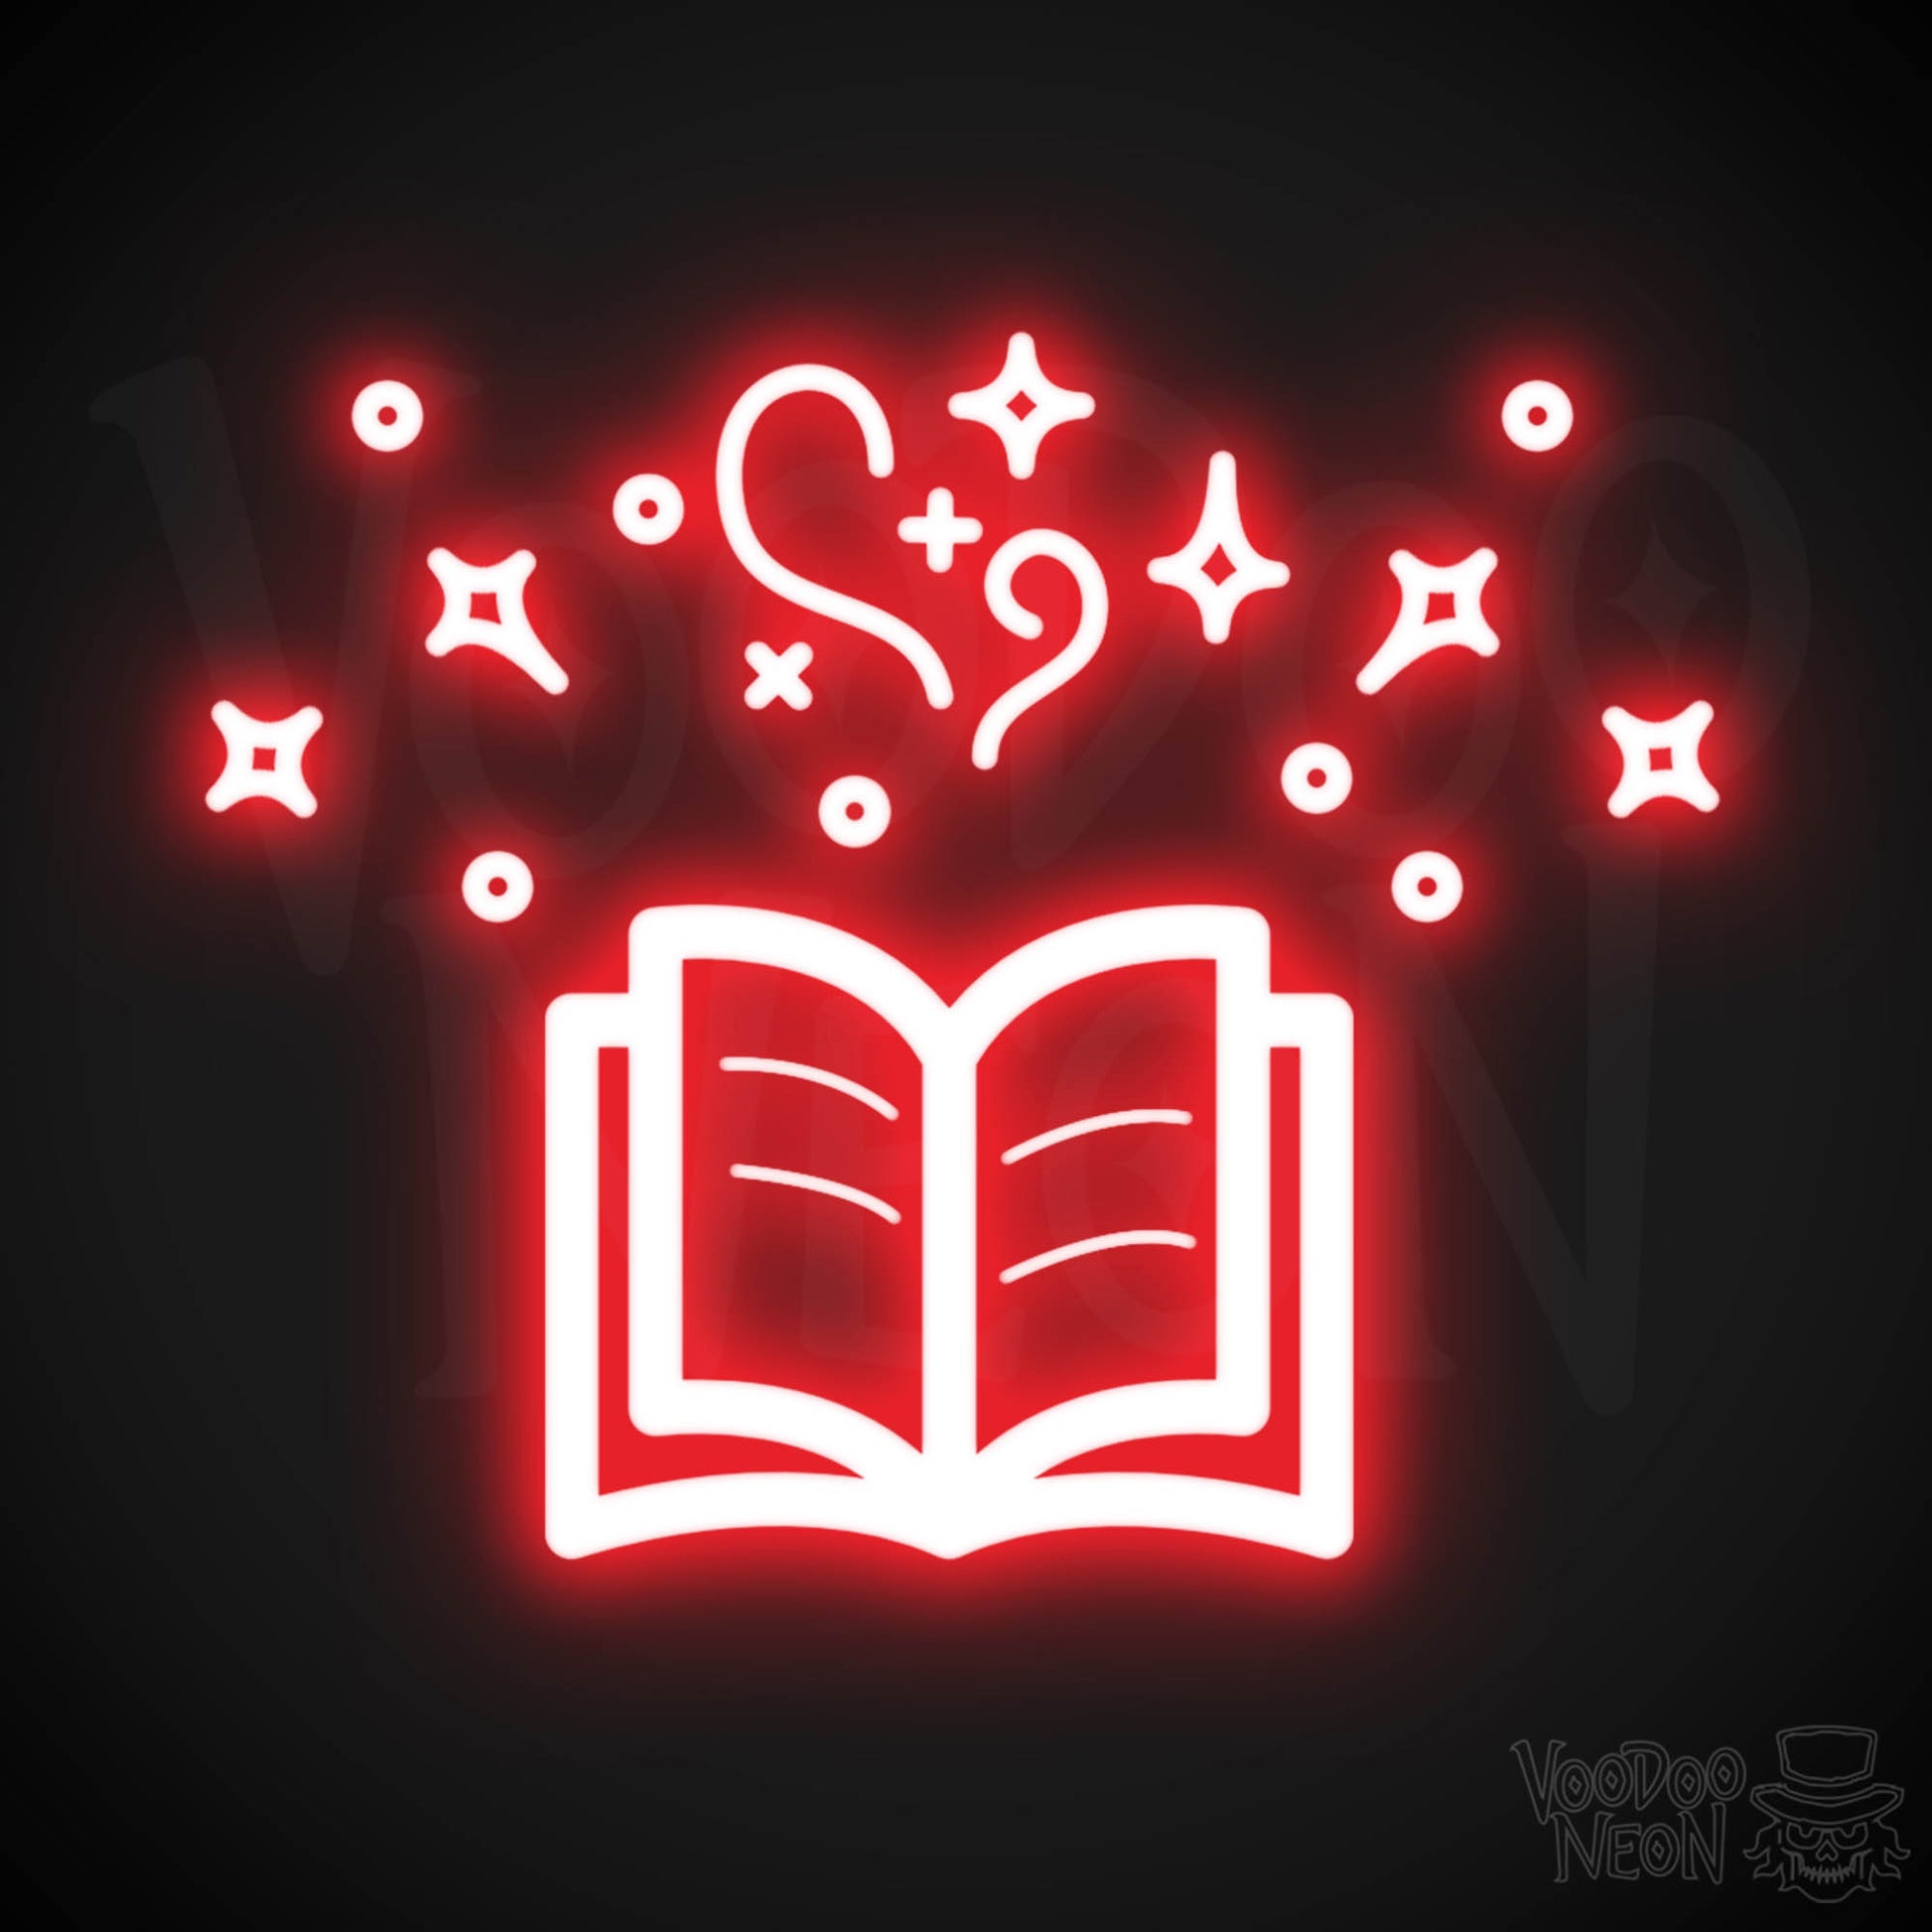 Neon Spell Book - Spell Book Neon Sign - LED Neon Wall Art - Color Red